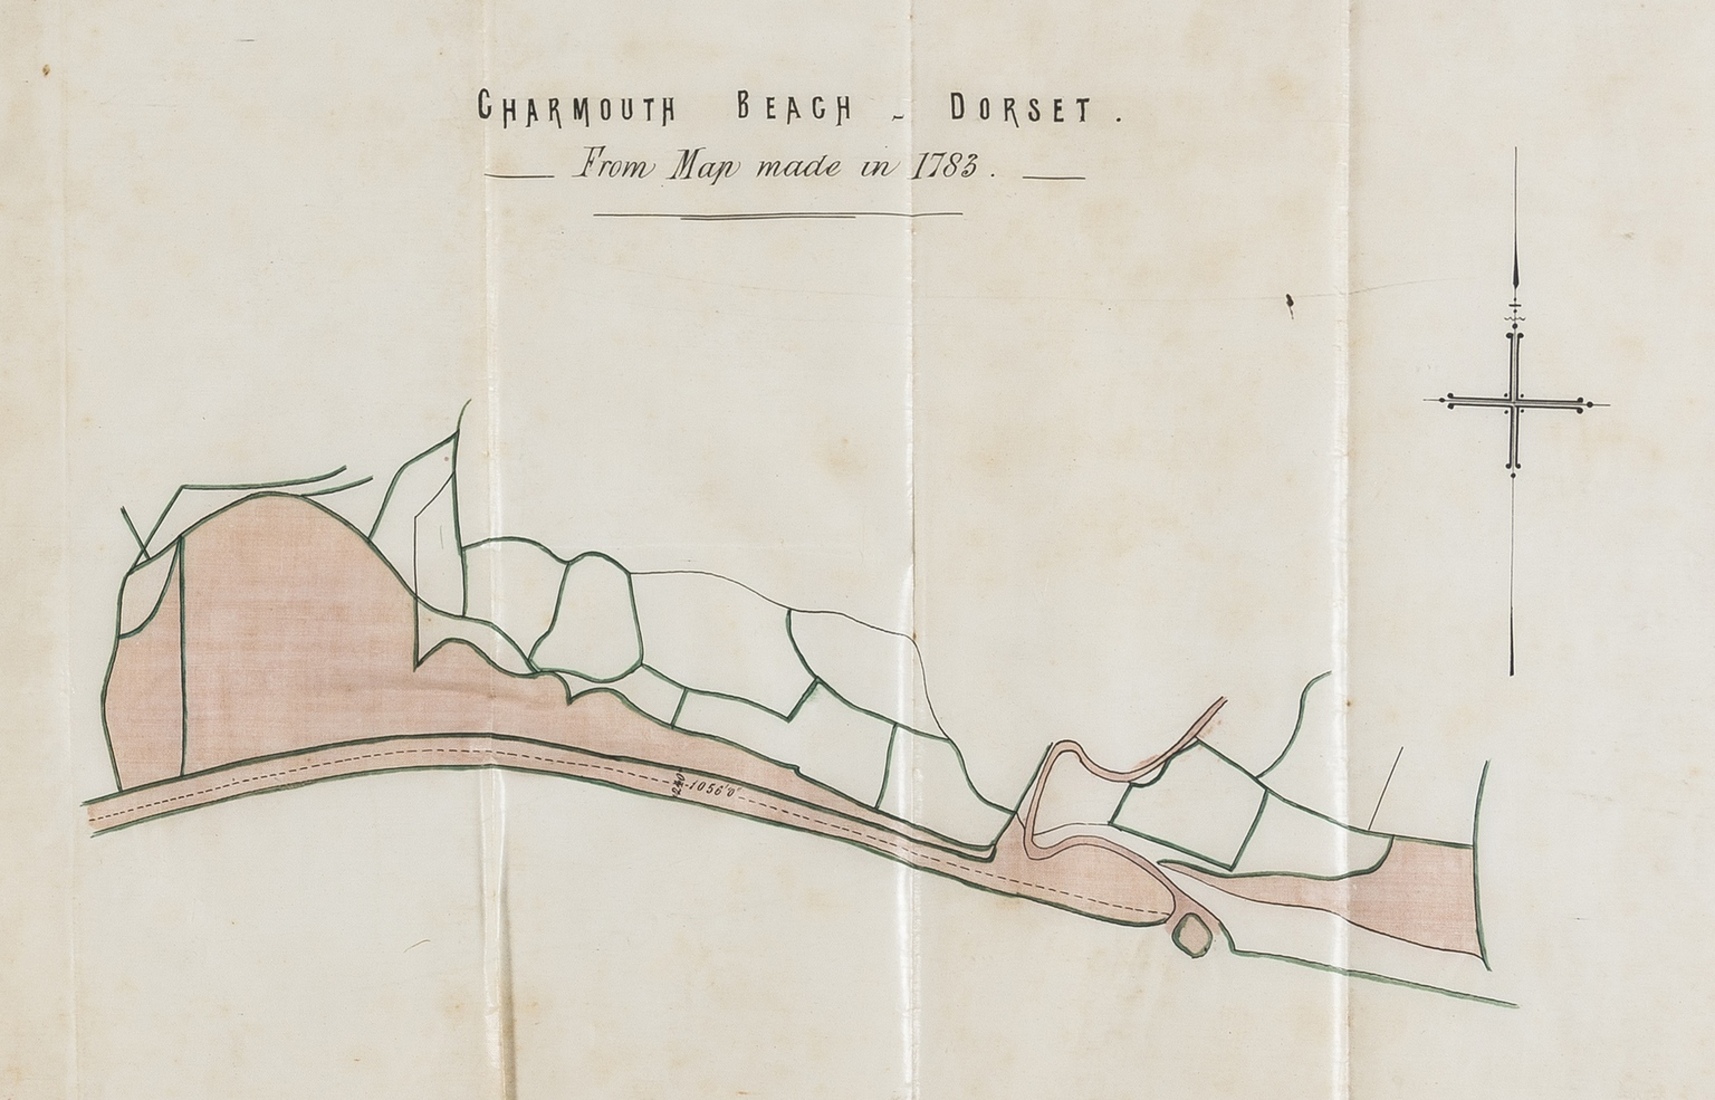 Dorset, Charmouth.- Charmouth Beach - Dorset. From Map Made in 1783, folding pen and ink with …